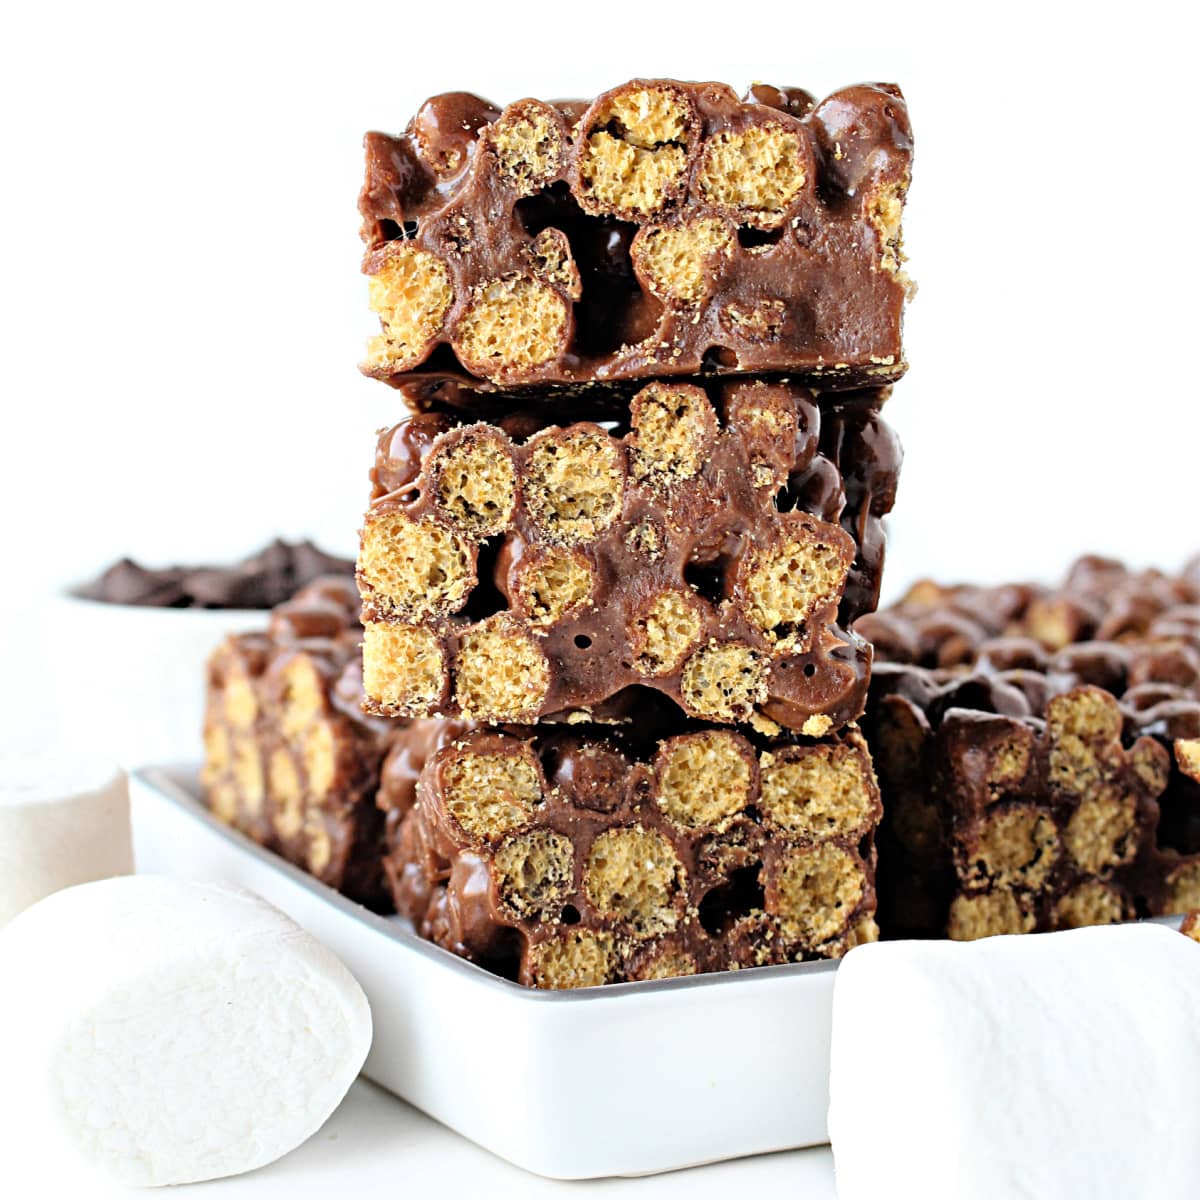 Close up stack of cereal bars showing cereal puffs connected by chocolate marshmallow mixture.